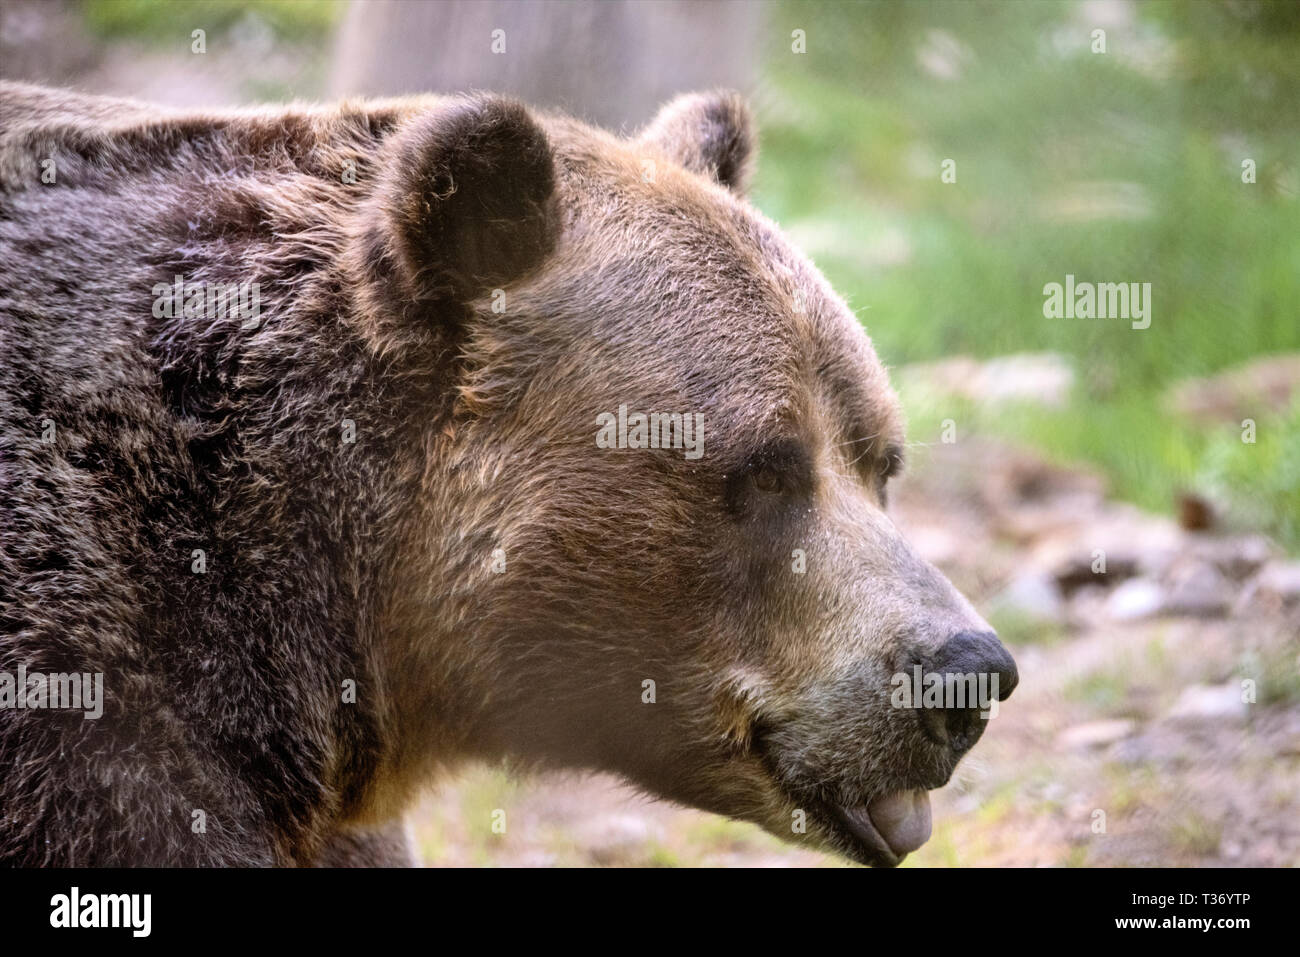 Grizzly bear close up Stock Photo